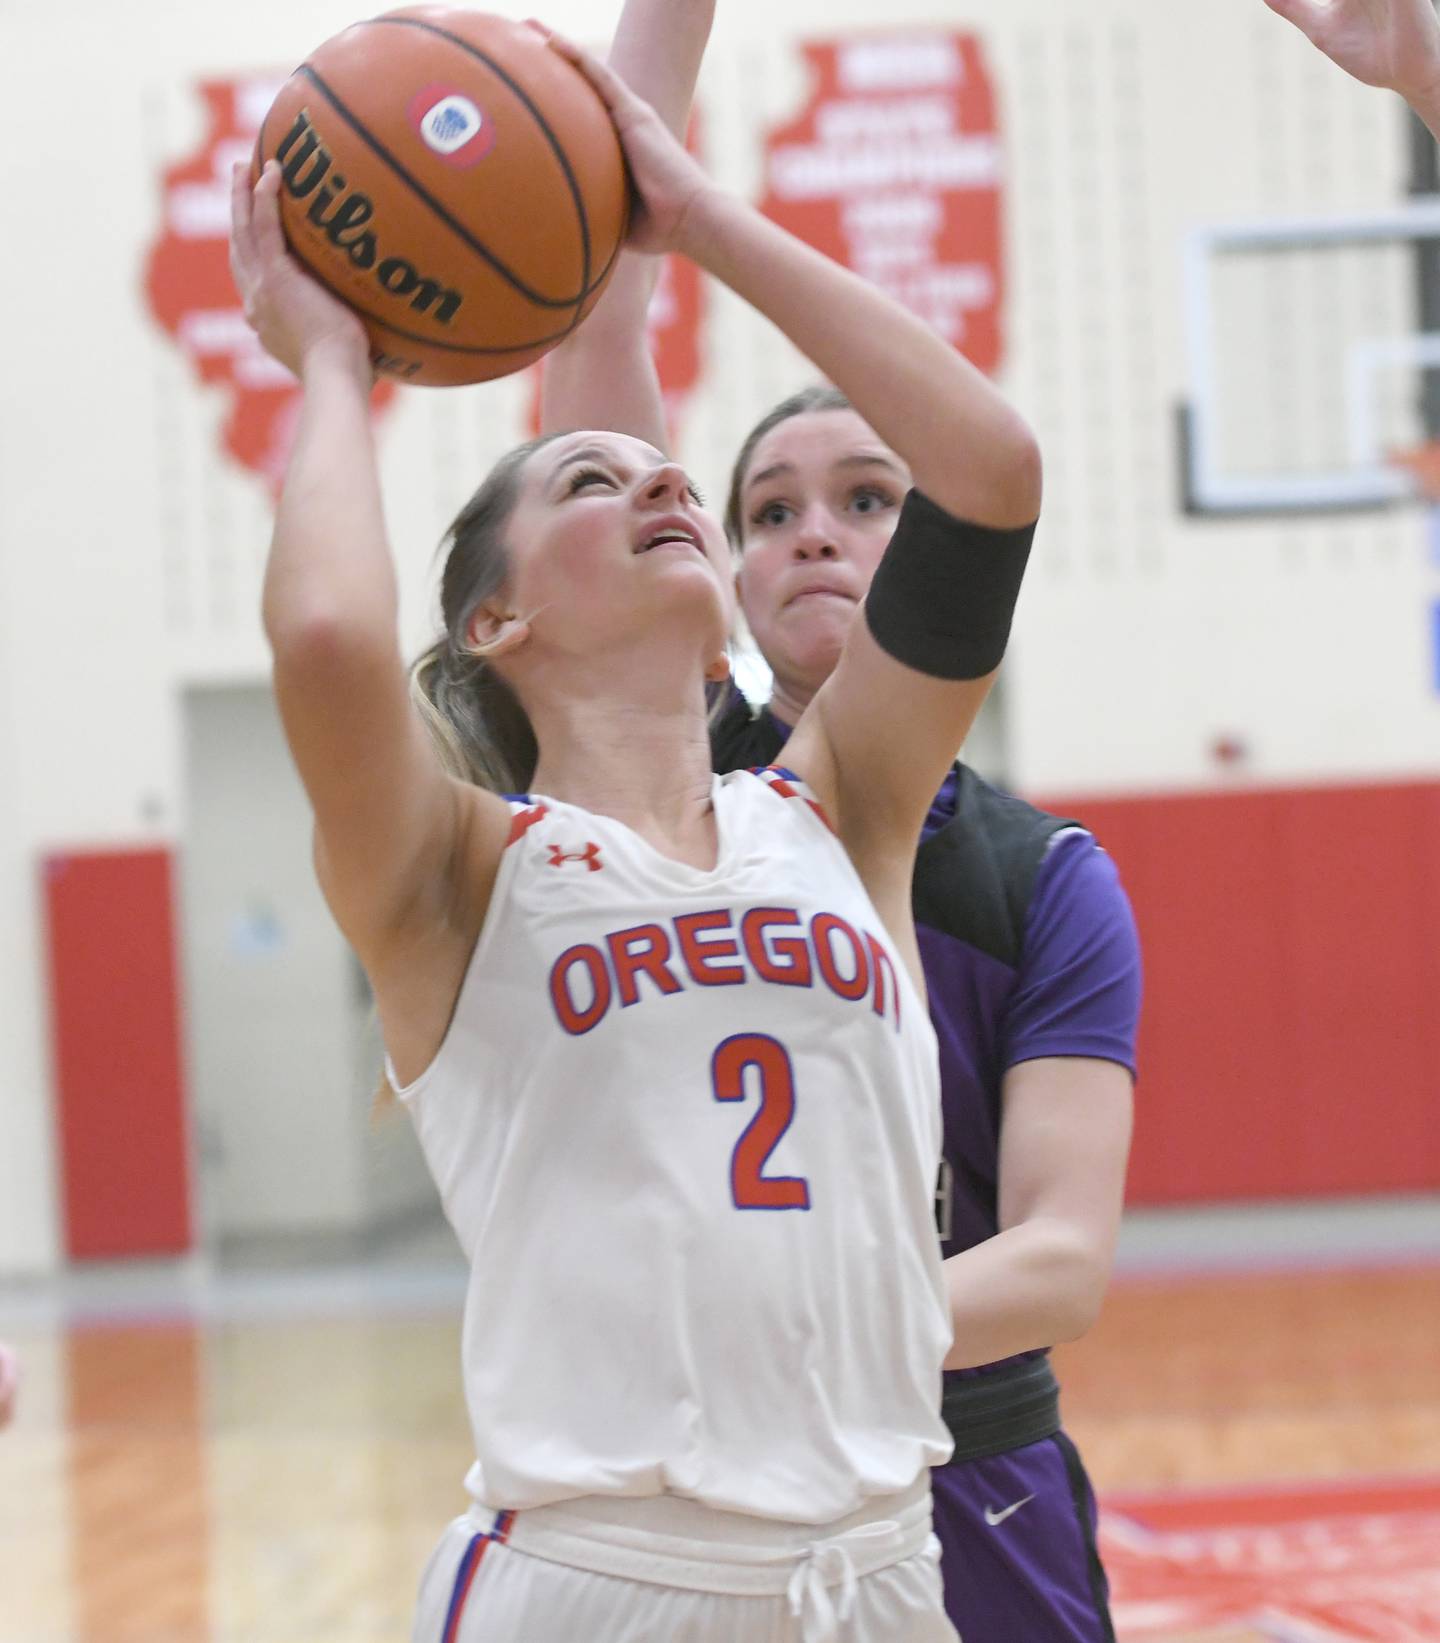 Oregon's Ava Hackman (2) shoots during Big Northern Conference action against Dixon at the Blackhawk Center in Oregon on Saturday, Jan, 21.